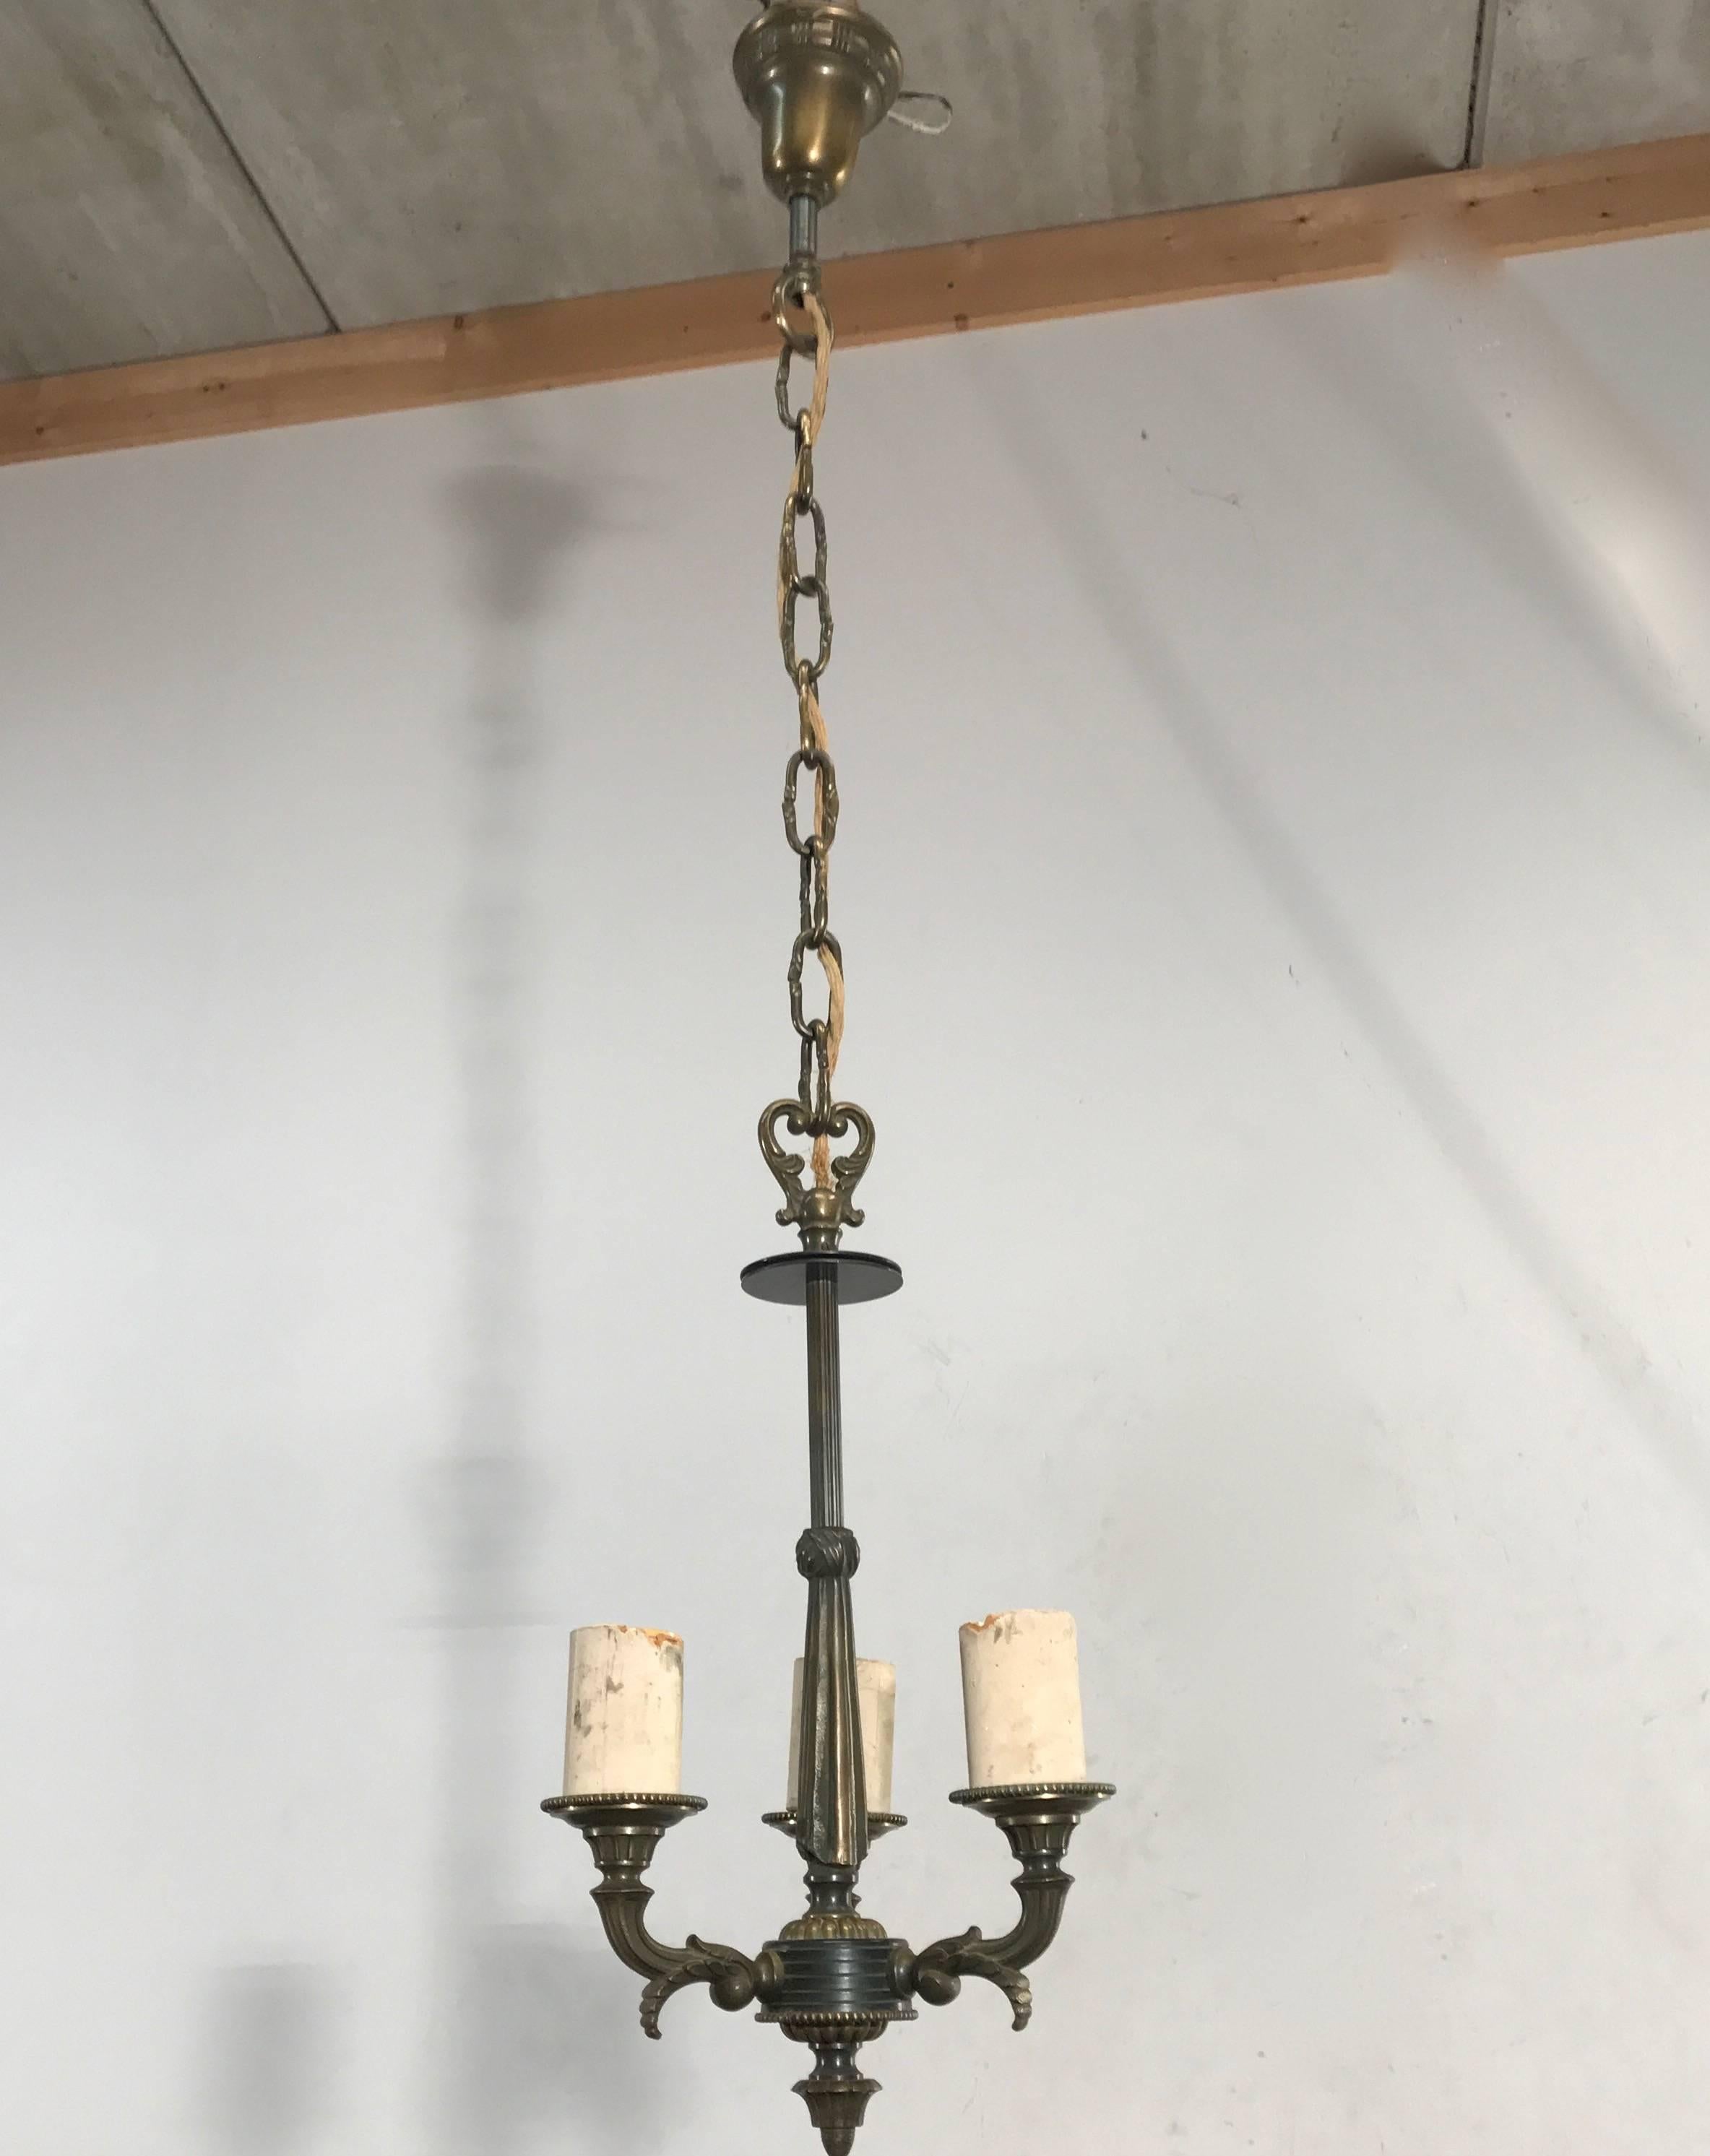 Rare size chandelier from the 1920s.

If you look at the shape of the centre and the shape of the arms that grow out of this pendant then you capture the essence of it. It is stylish, timeless and, unlike most home accessories that you find in